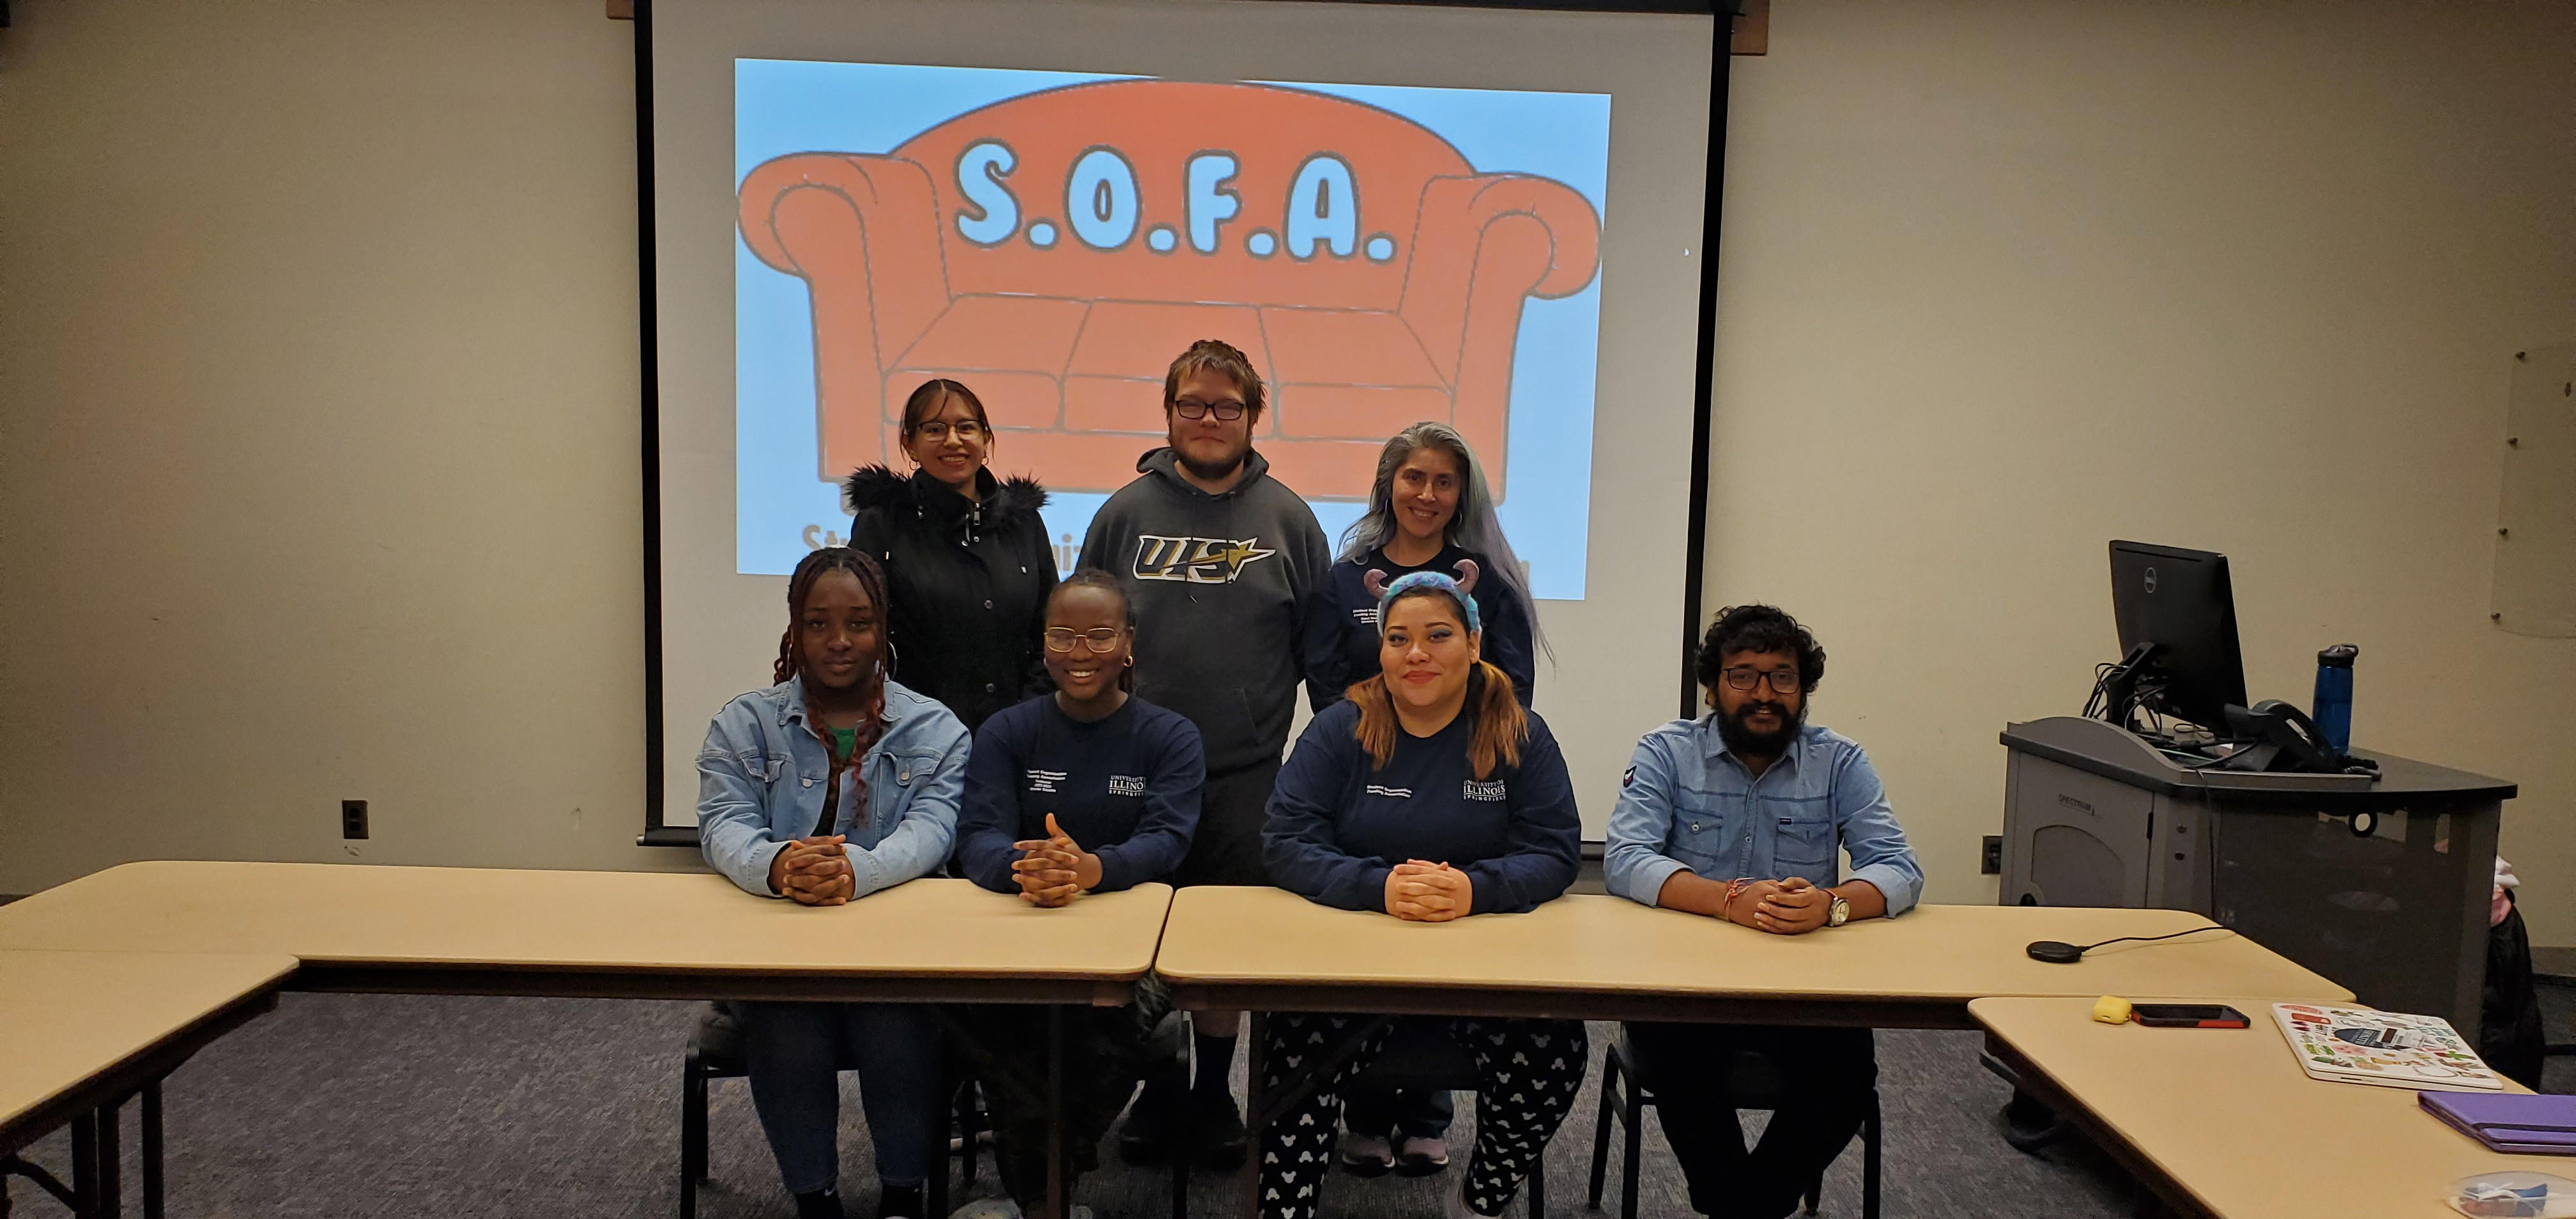 Members of S.O.F.A. during a meeting